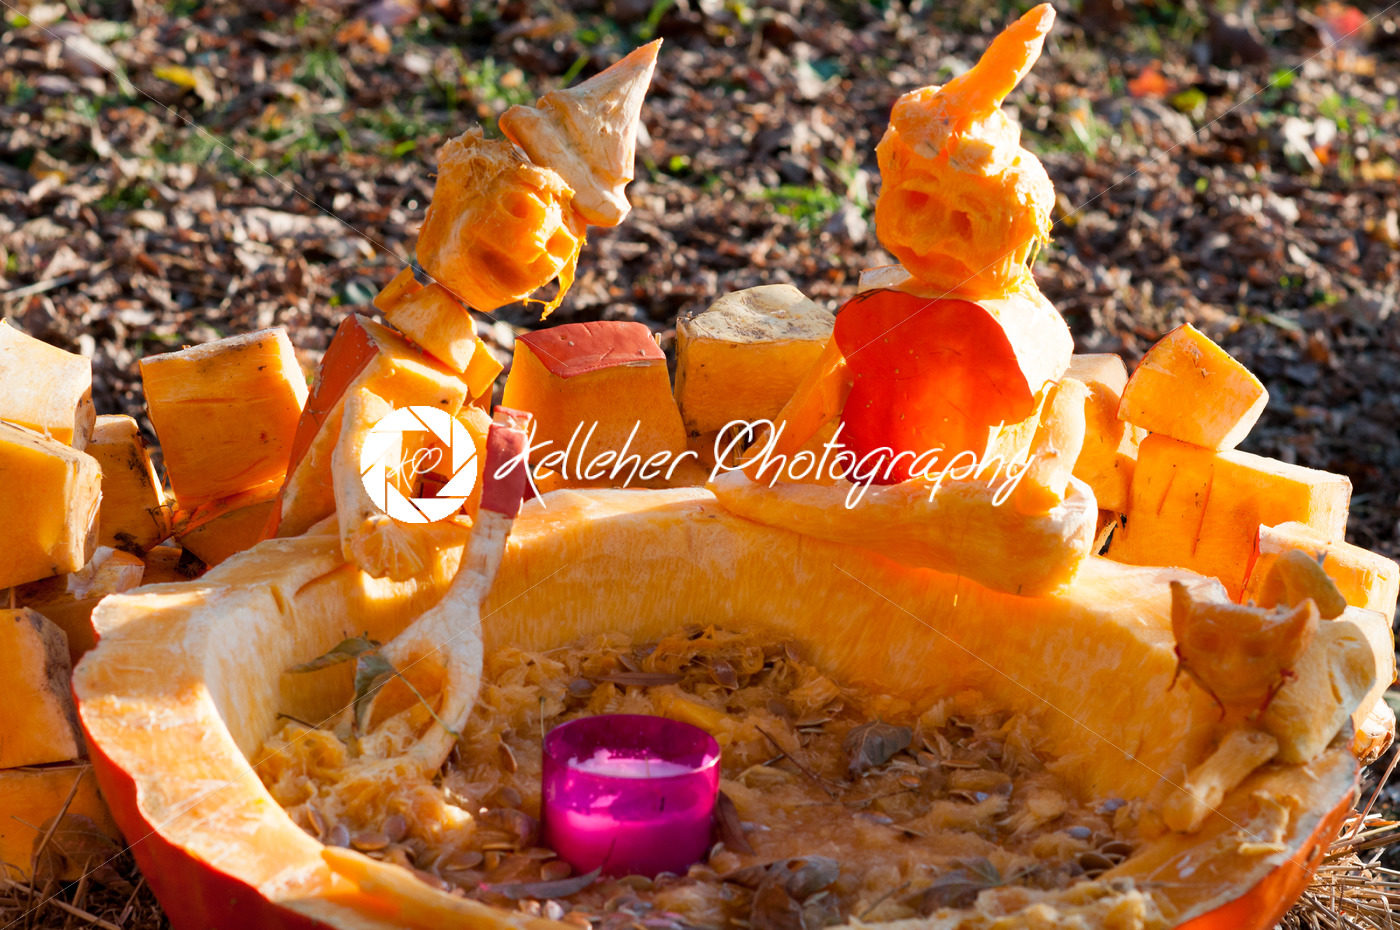 CHADDS FORD, PA – OCTOBER 26: Witch Caldron Pumpkin at The Great Pumpkin Carve carving contest on October 26, 2013 - Kelleher Photography Store